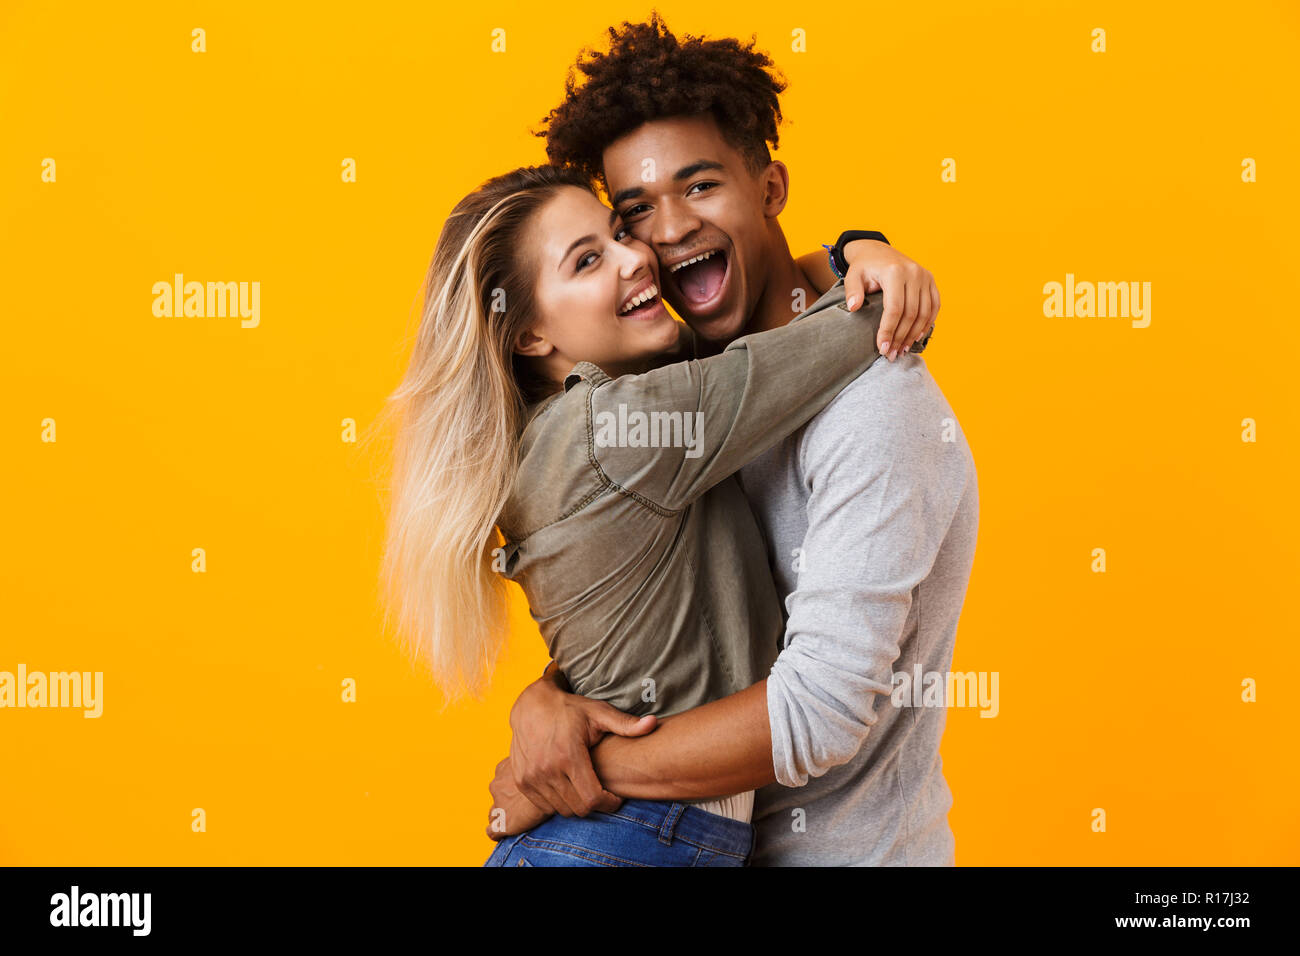 Image Of Happy Cute Young Loving Couple Posing Isolated Over Yellow  Background Hugging. Stock Photo, Picture and Royalty Free Image. Image  110979010.